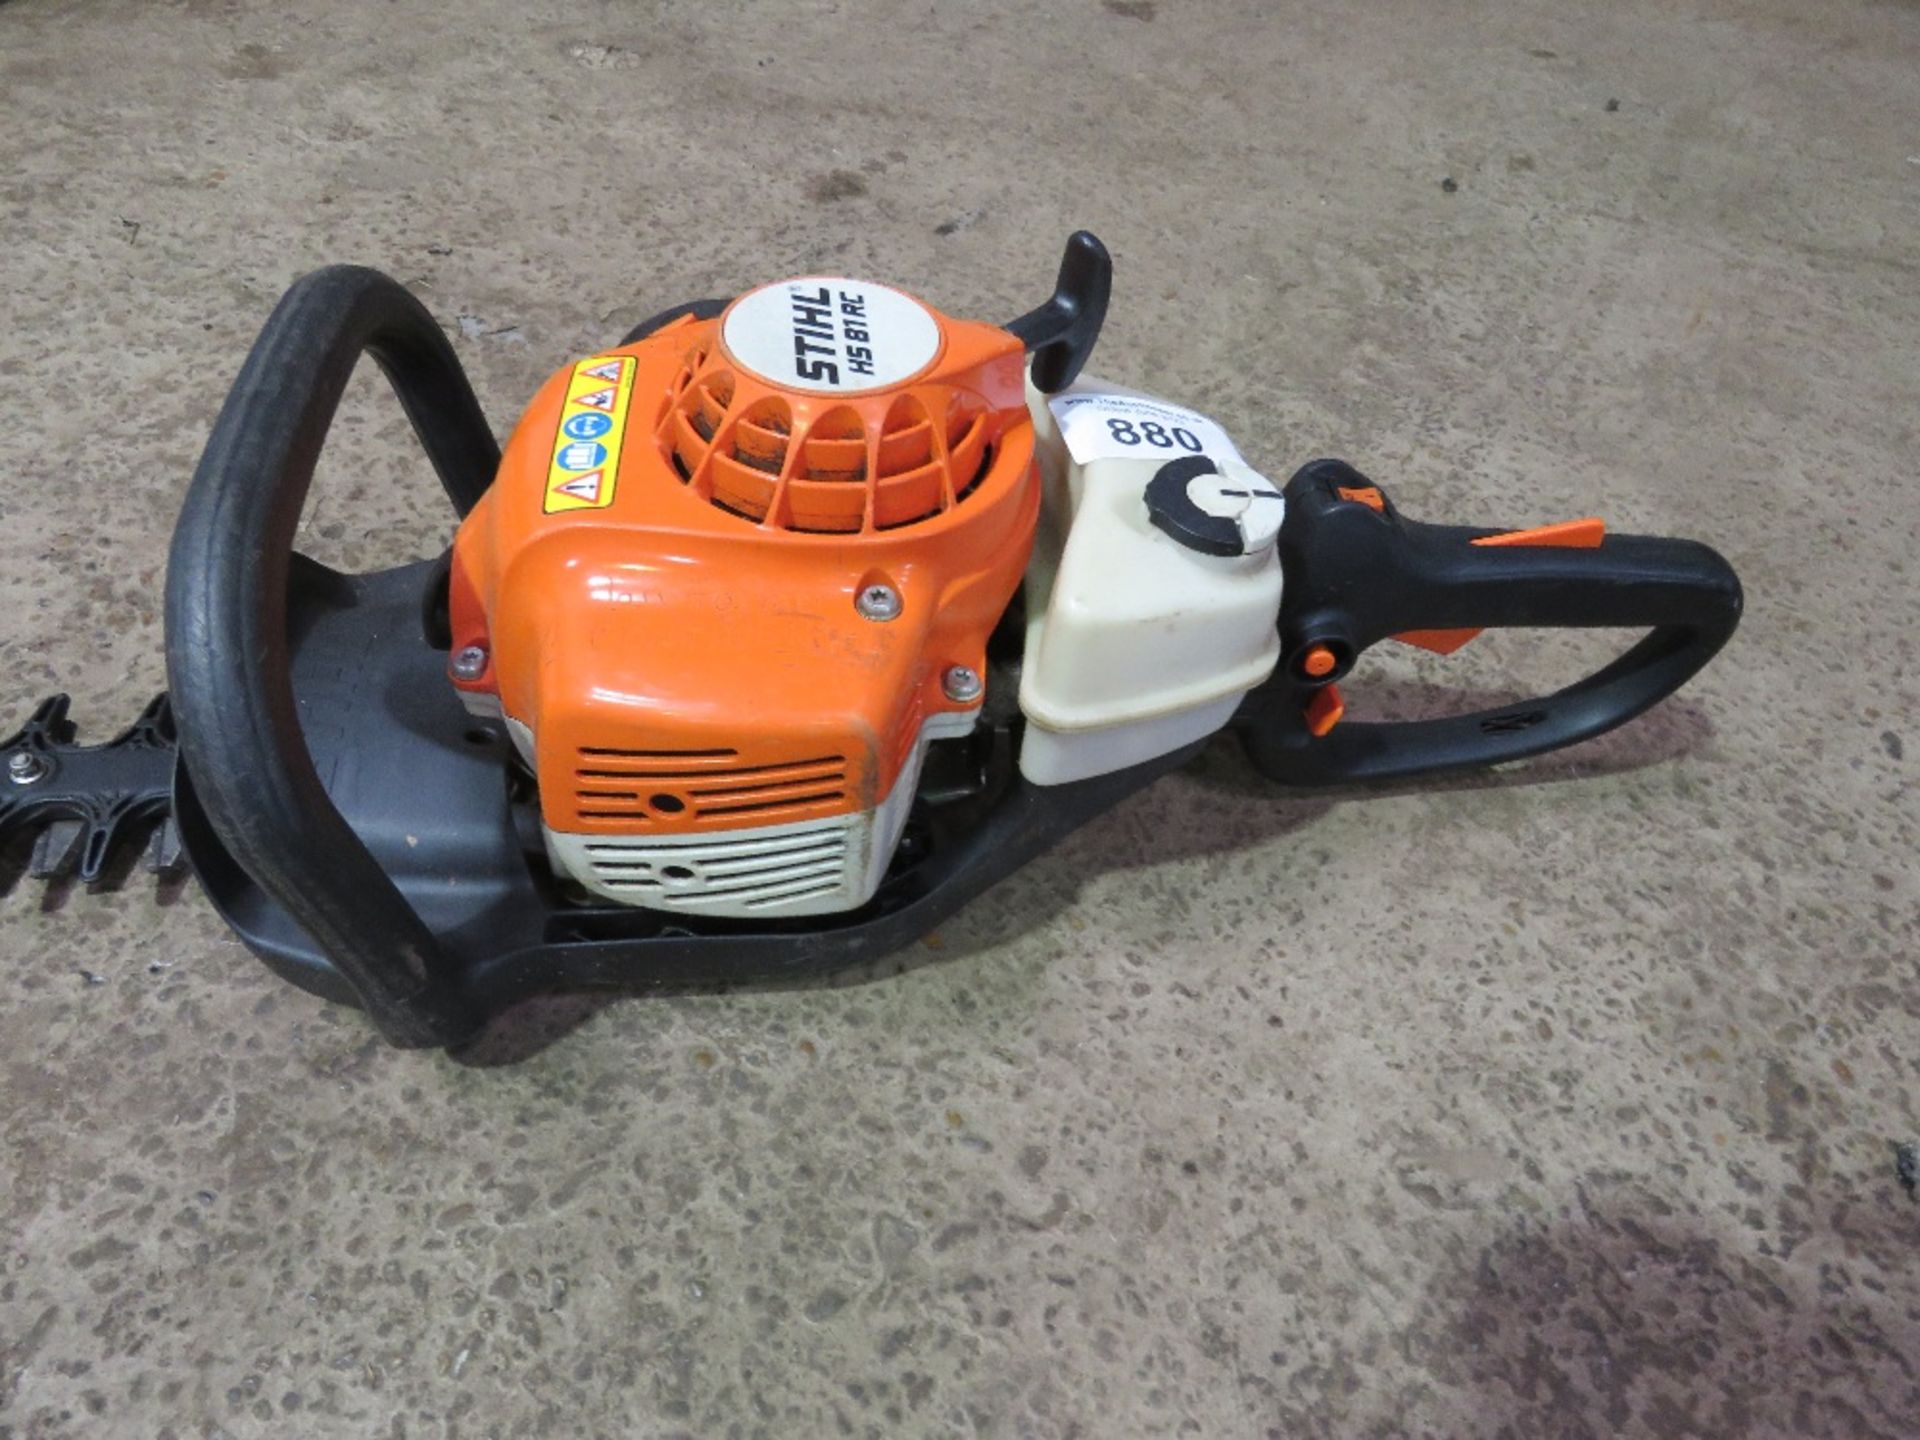 STIHL HS81RC PROFESSIONAL PETROL HEDGE CUTTER. - Image 5 of 5